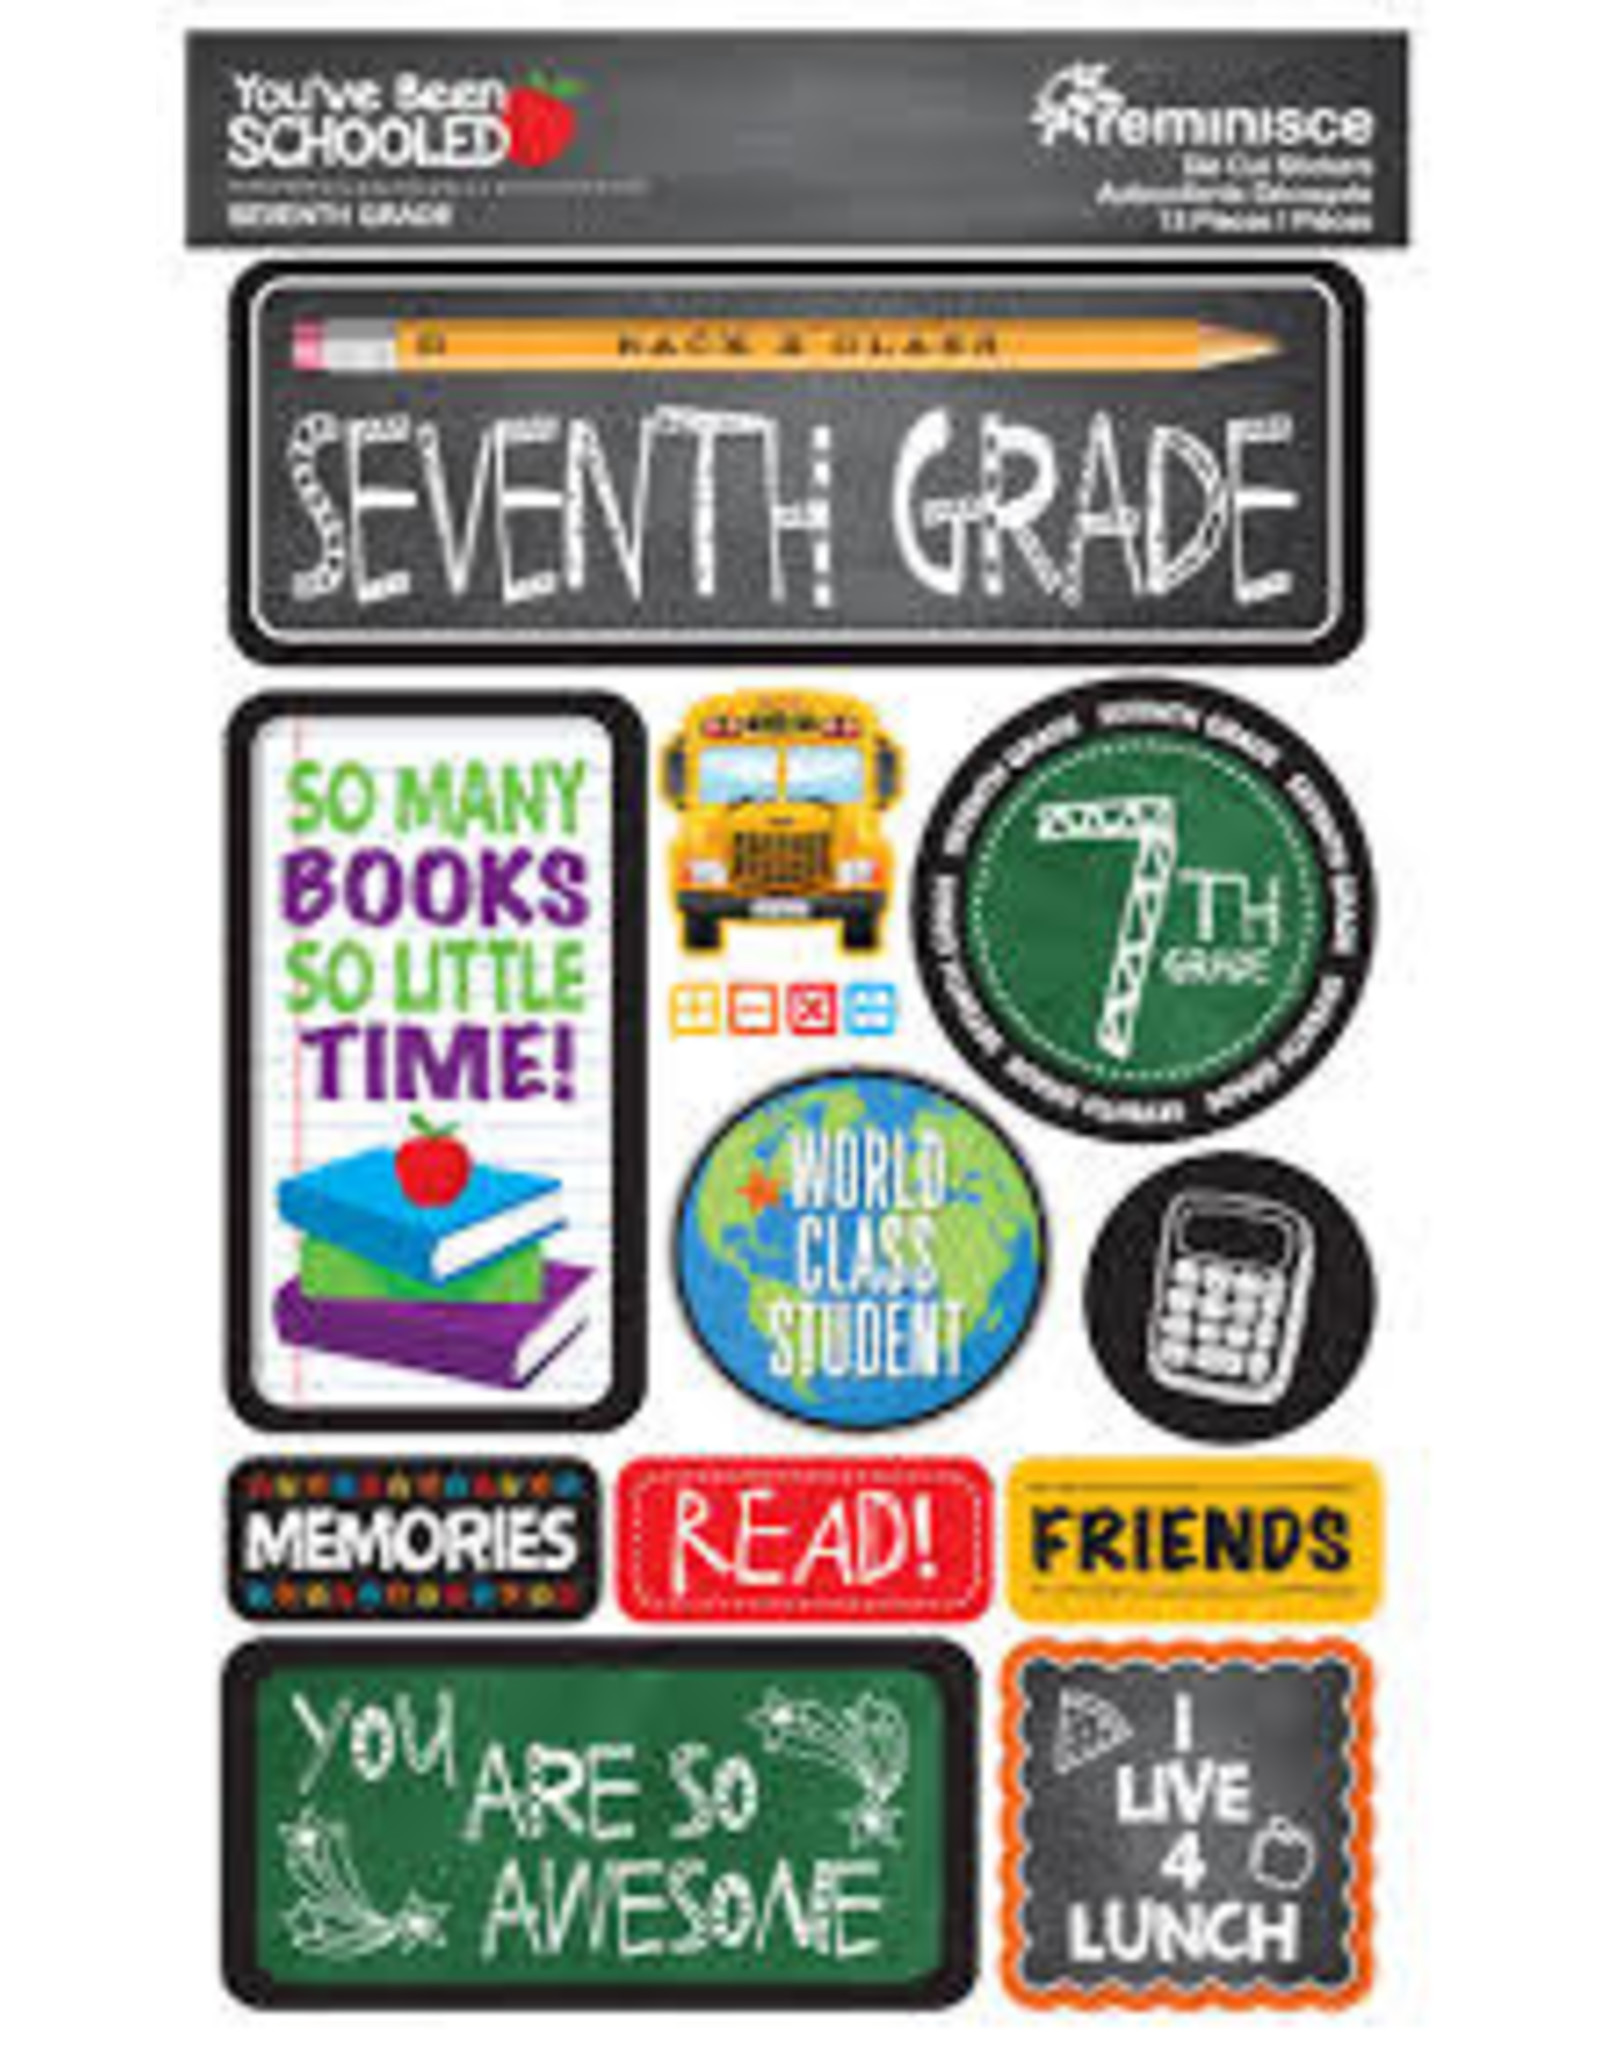 REMINISCE REMINISCE YOU'VE BEEN SCHOOLED SEVENTH GRADE 3D STICKERS